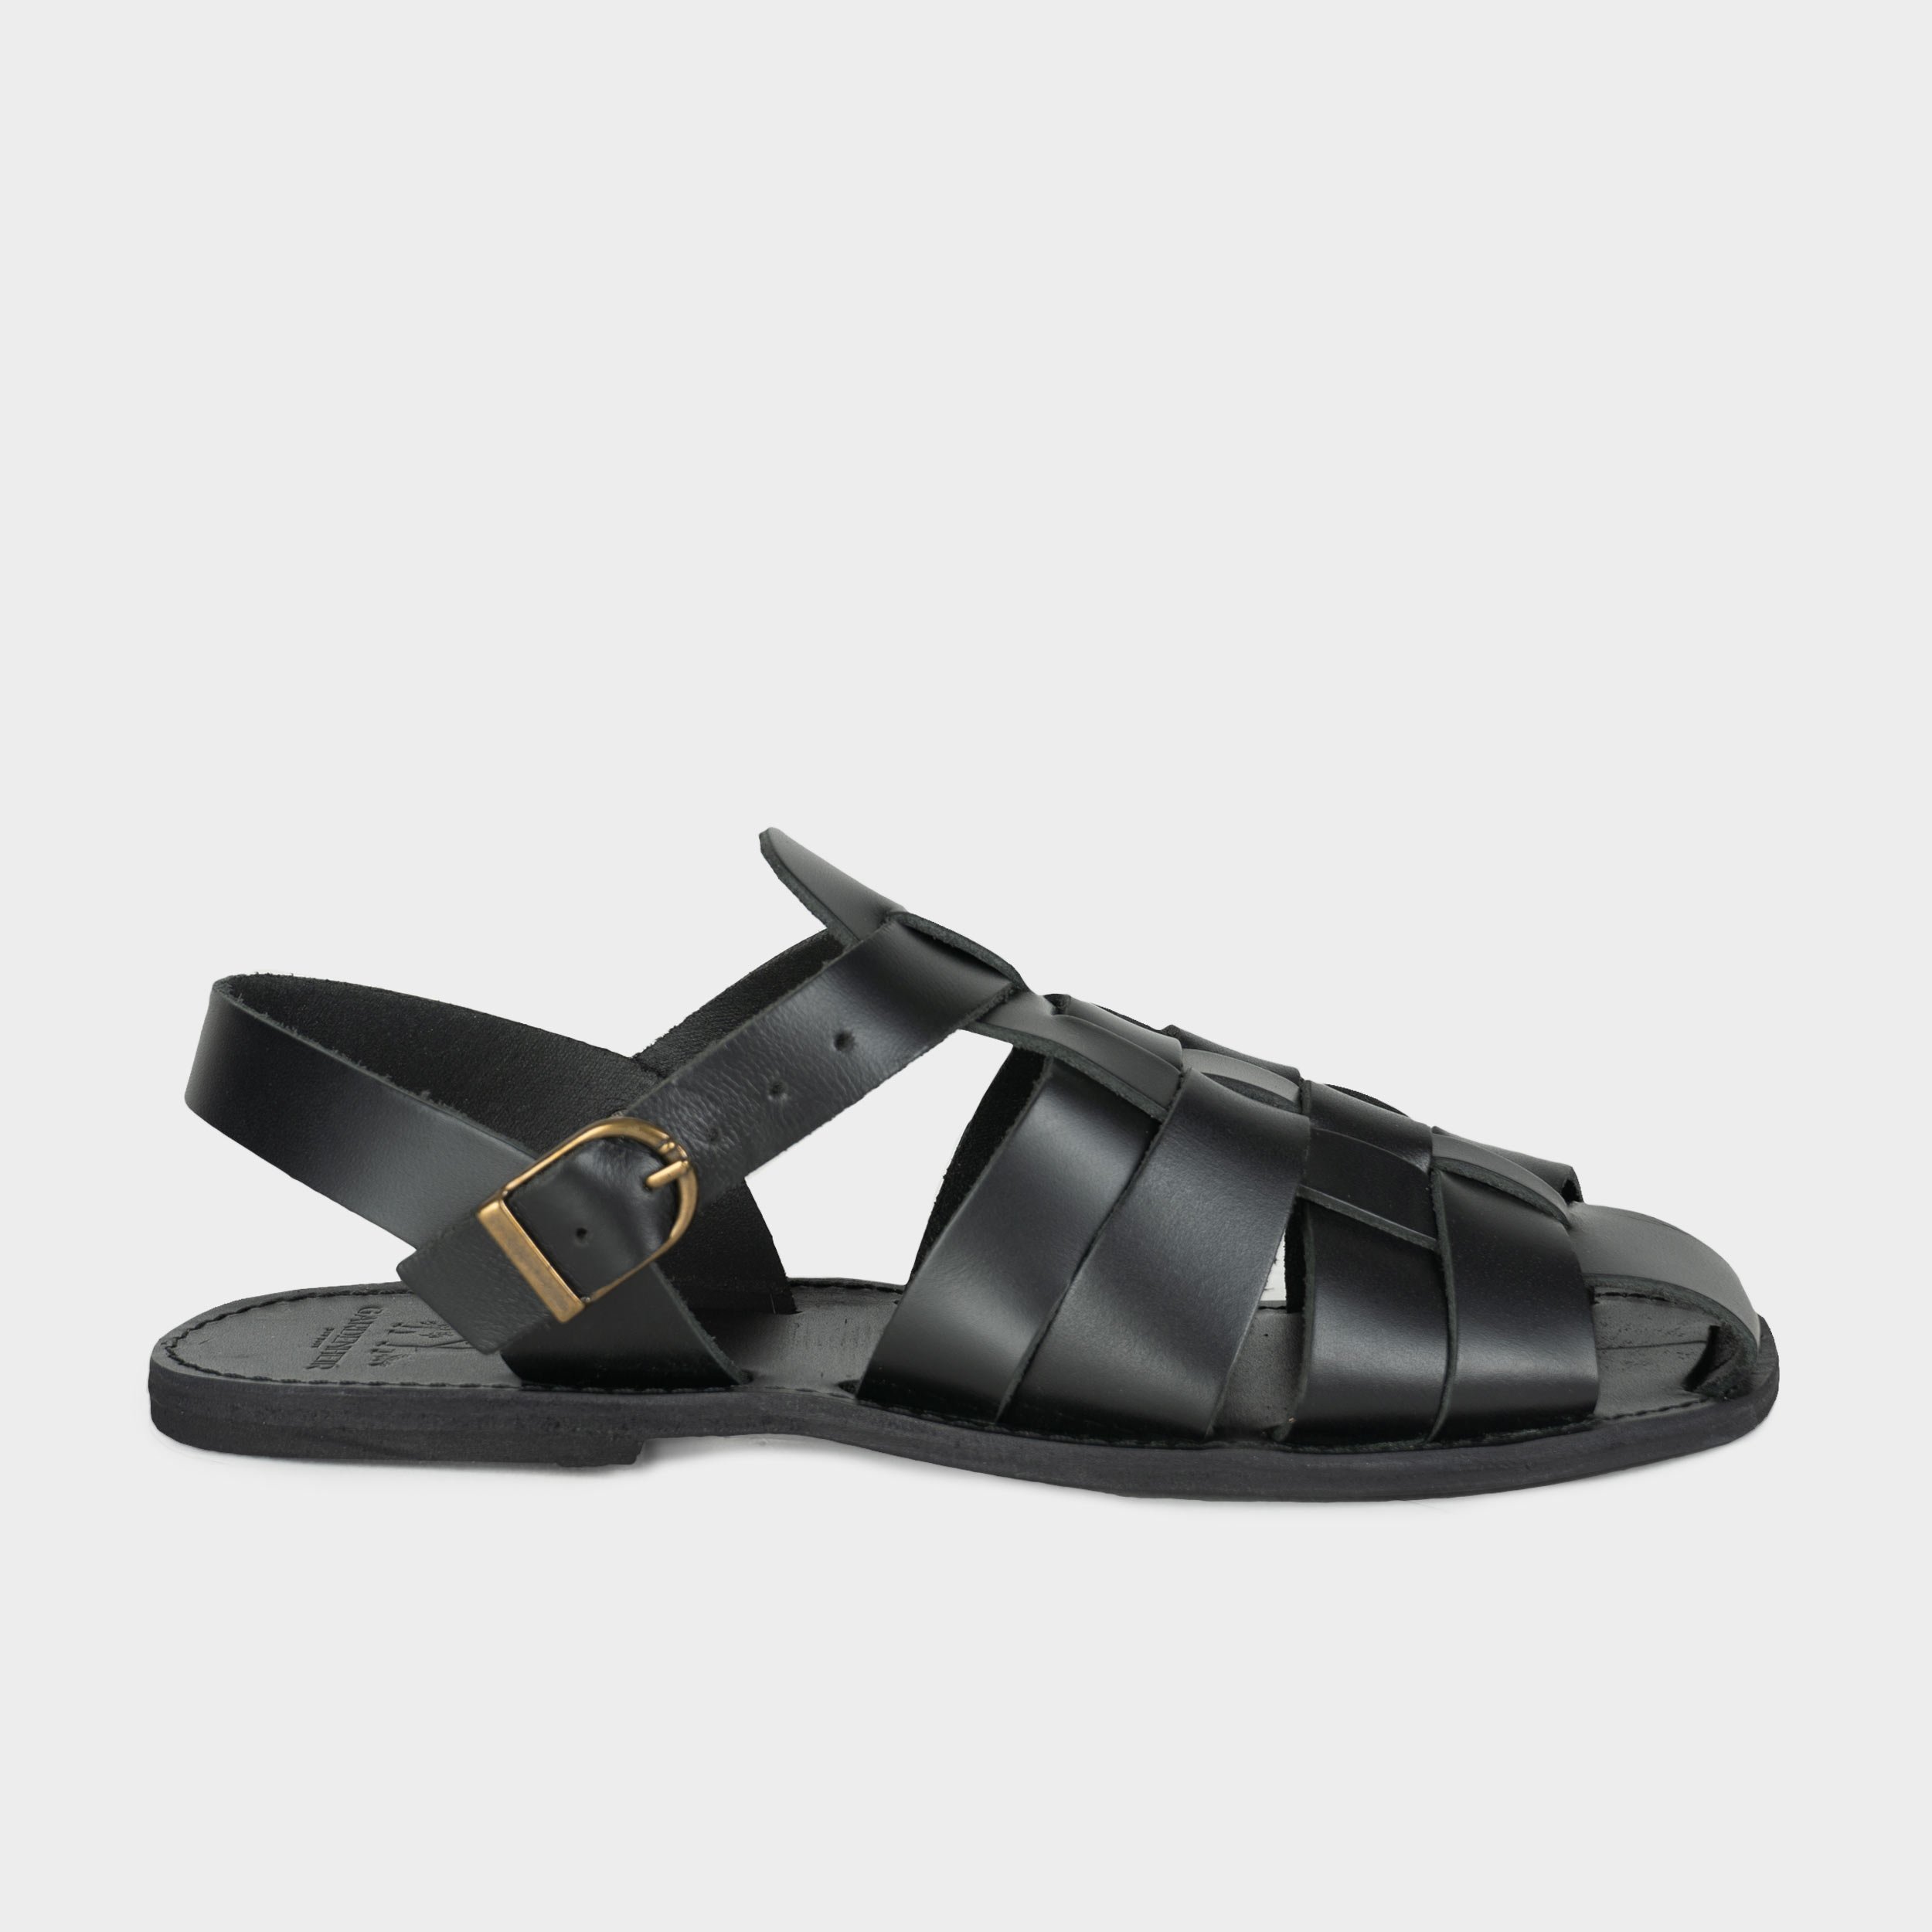 Leather Fisherman Sandals, French Fisherman Sandals, Black Leather ...